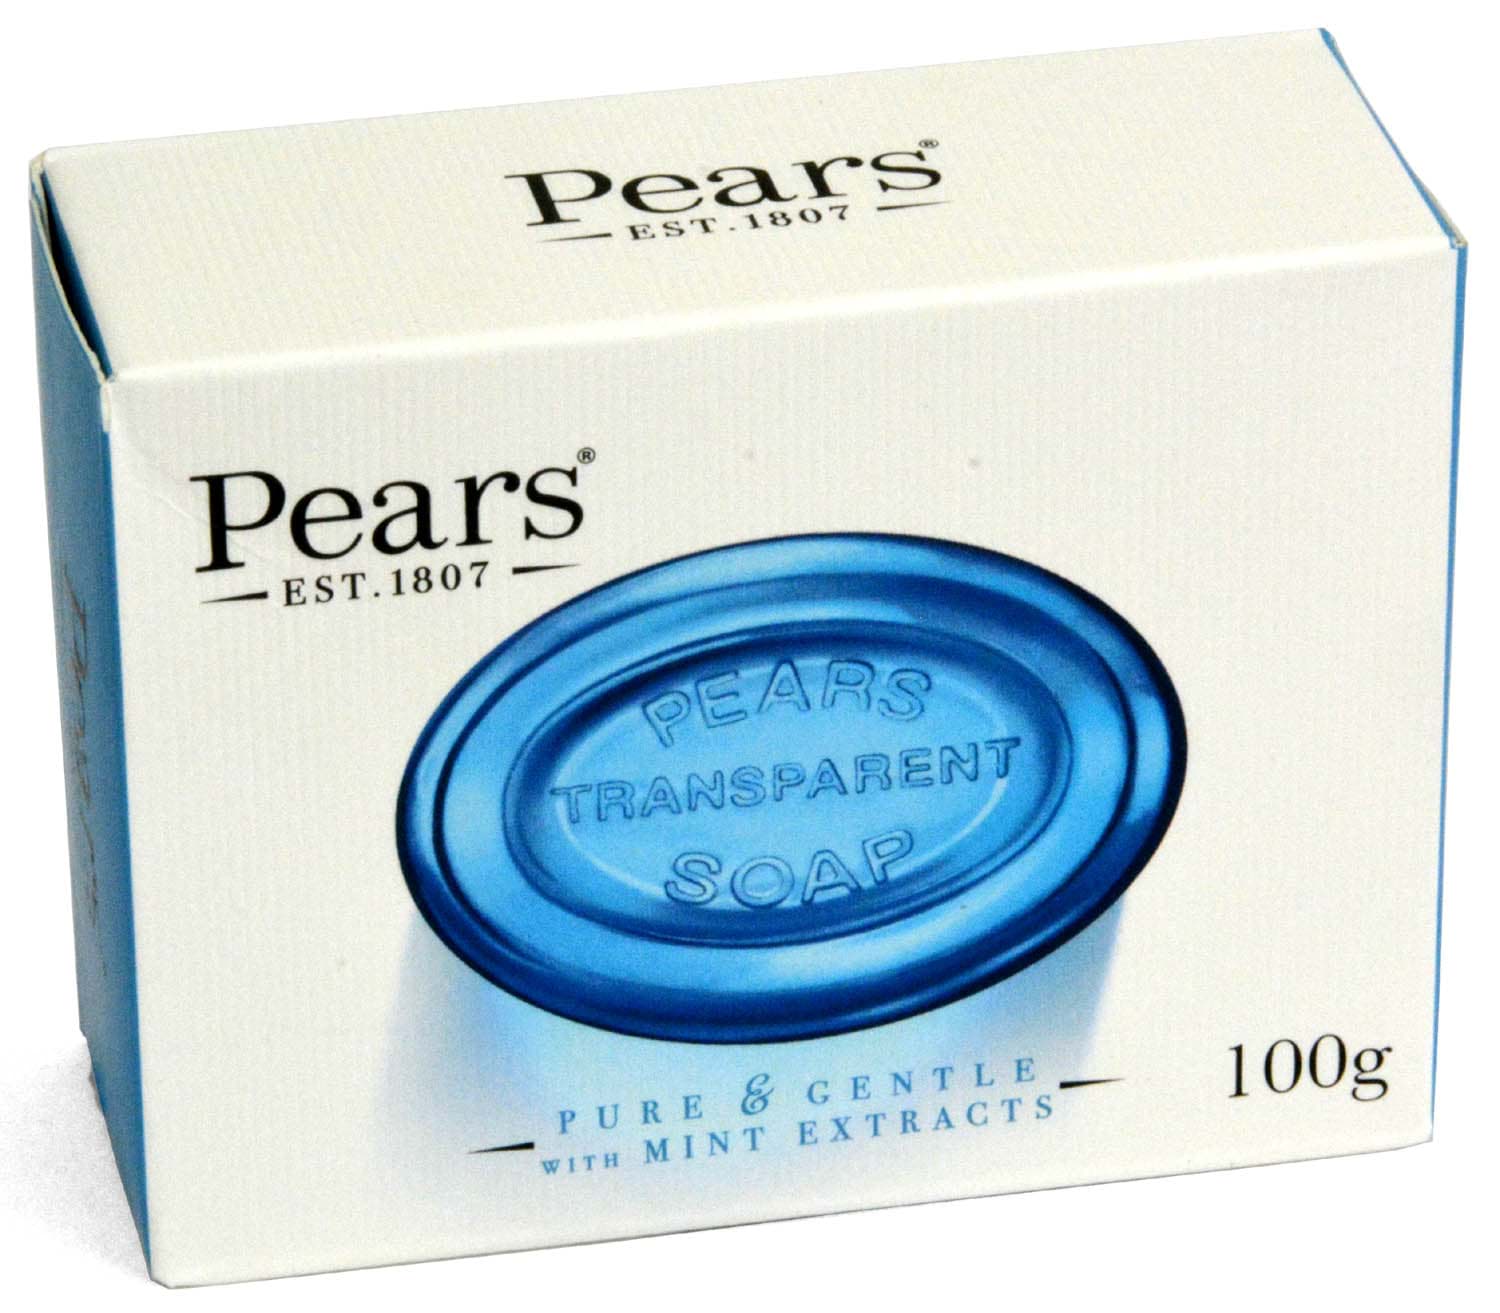 Picture of Pears Transparent Soap with Mint Extracts 100g